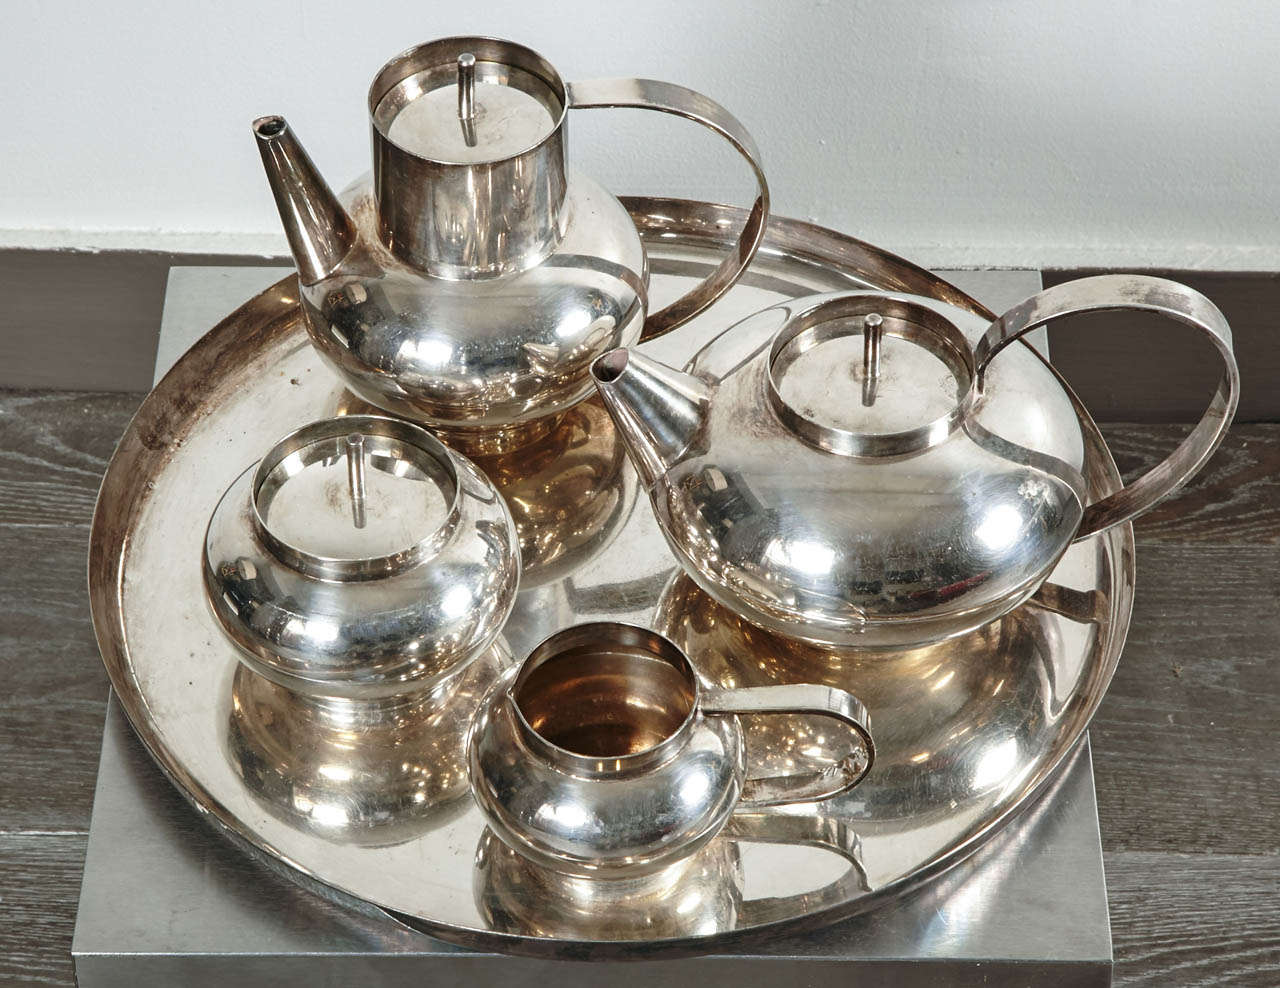 Elegant service by Lino Sabattini and Christofle
in silver plated metal
with a coffee pot , a tea pot , a creamer , a sugar bowl and a tray.
All pieces with Gallia marks
circa 1960